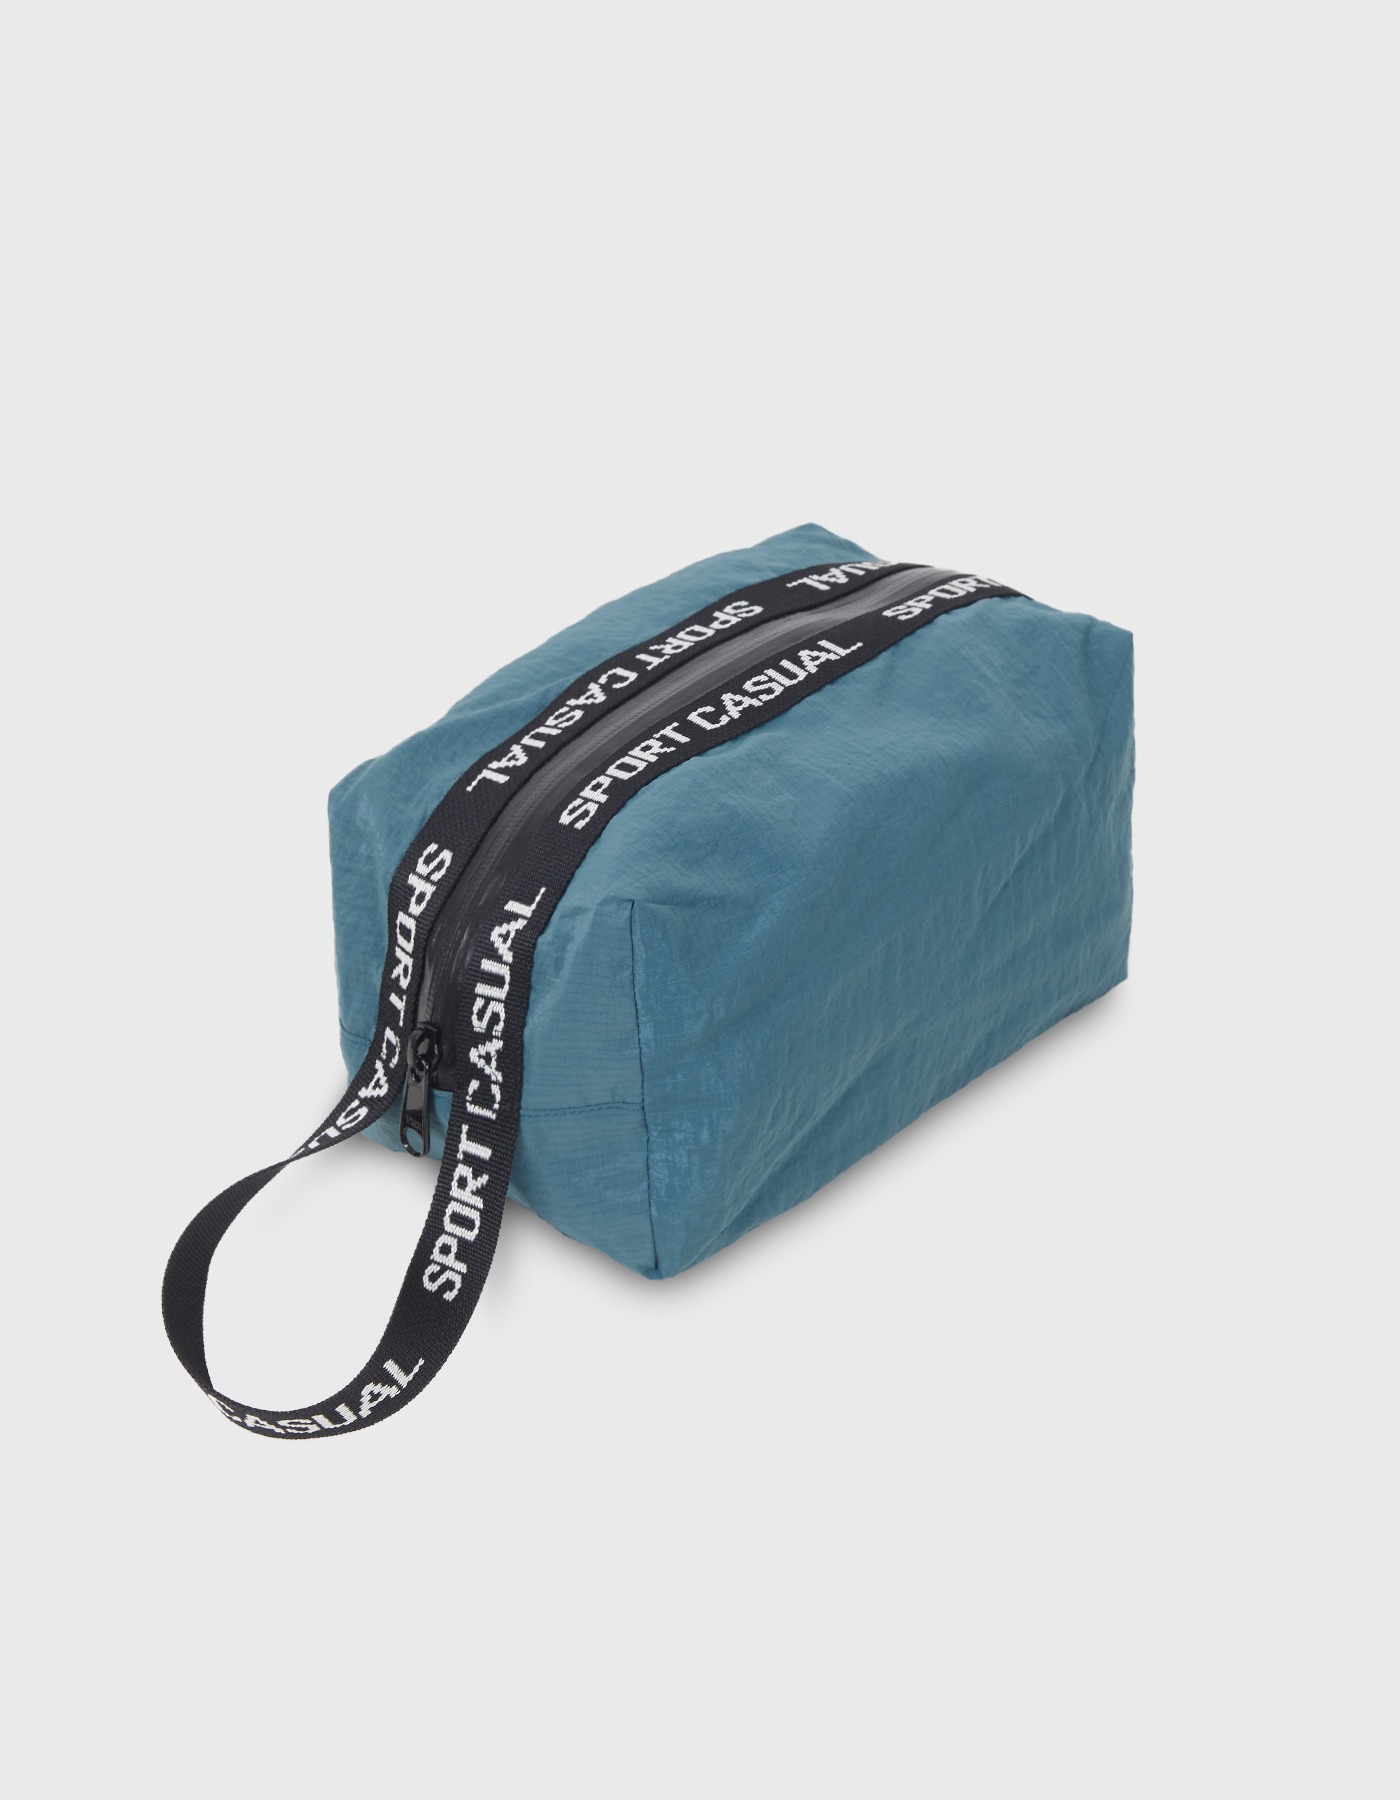 NYLON RIPSTOP WASHER SPORTS POUCH / Ocean Blue